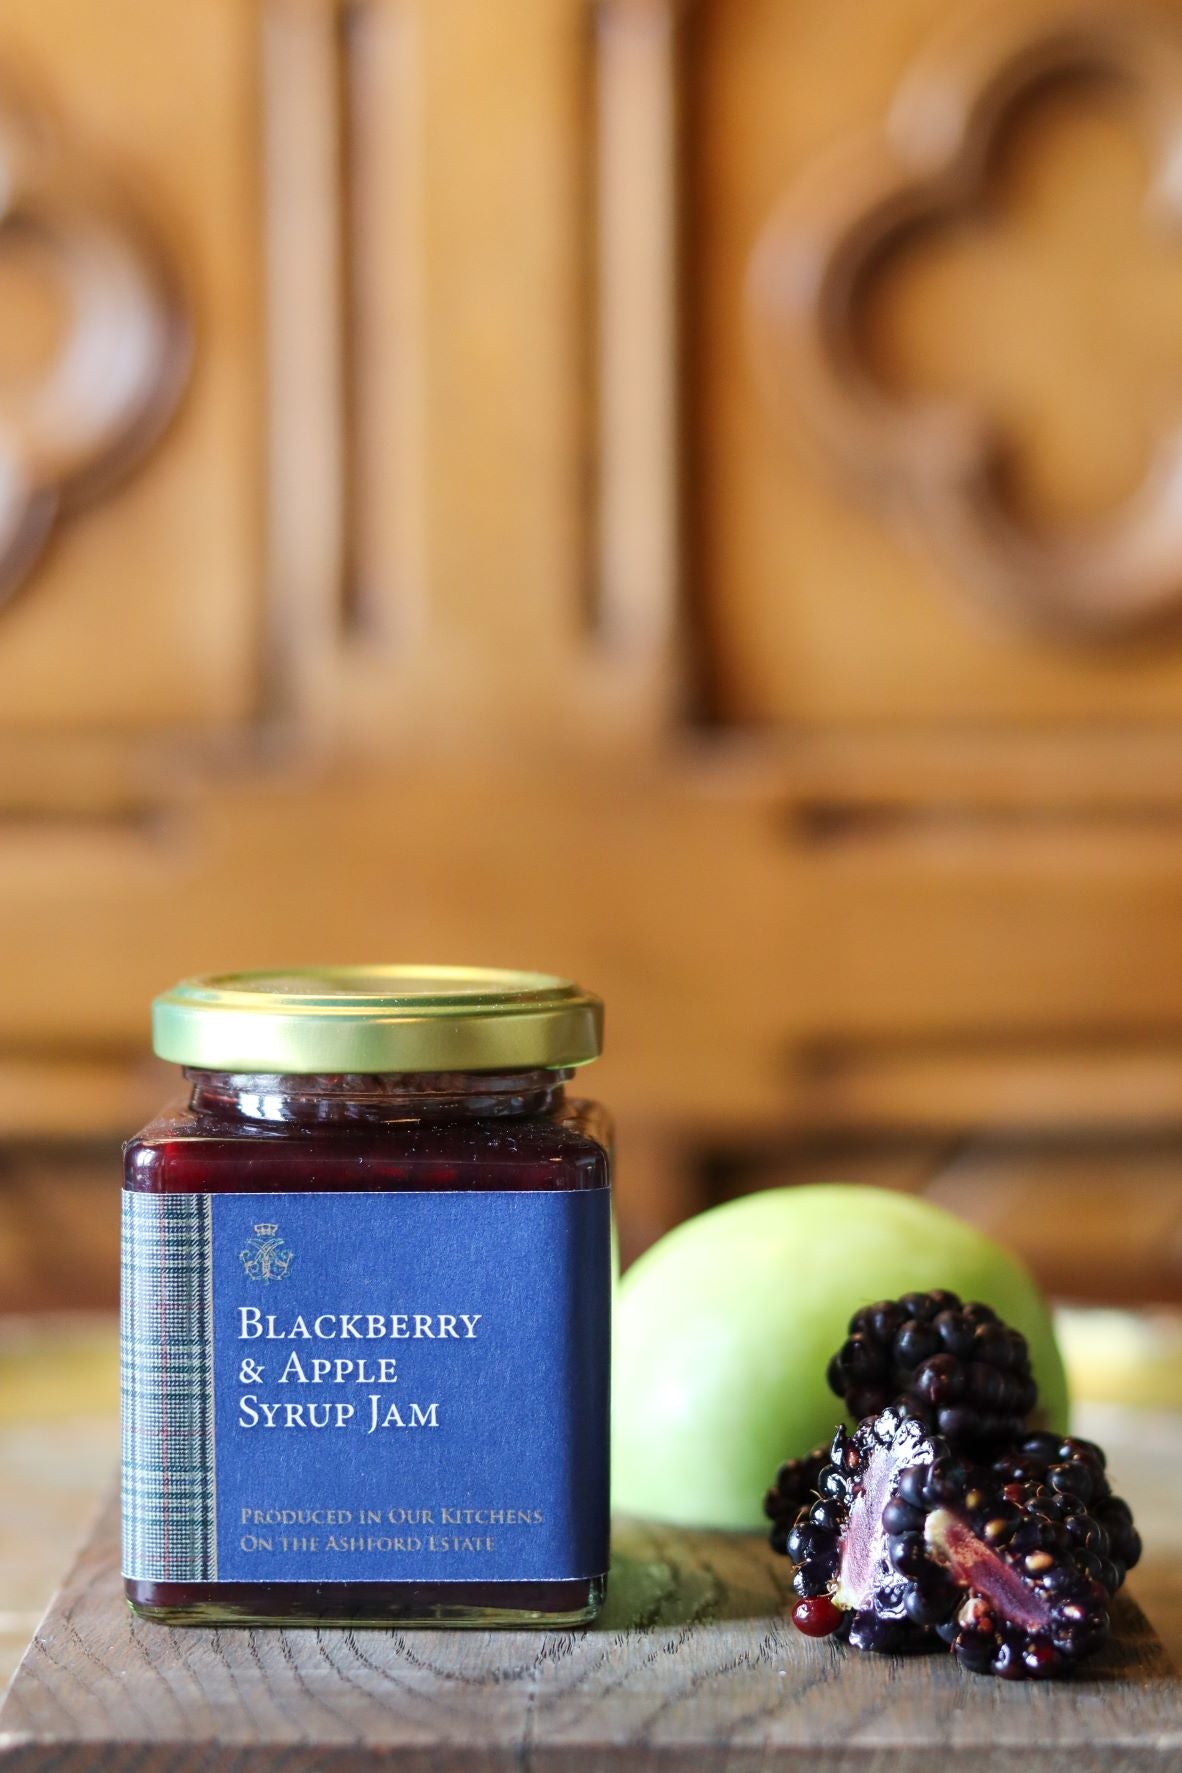 Blackberry & Apple Syrup Jam Mrs Tea's Boutique and Bakery